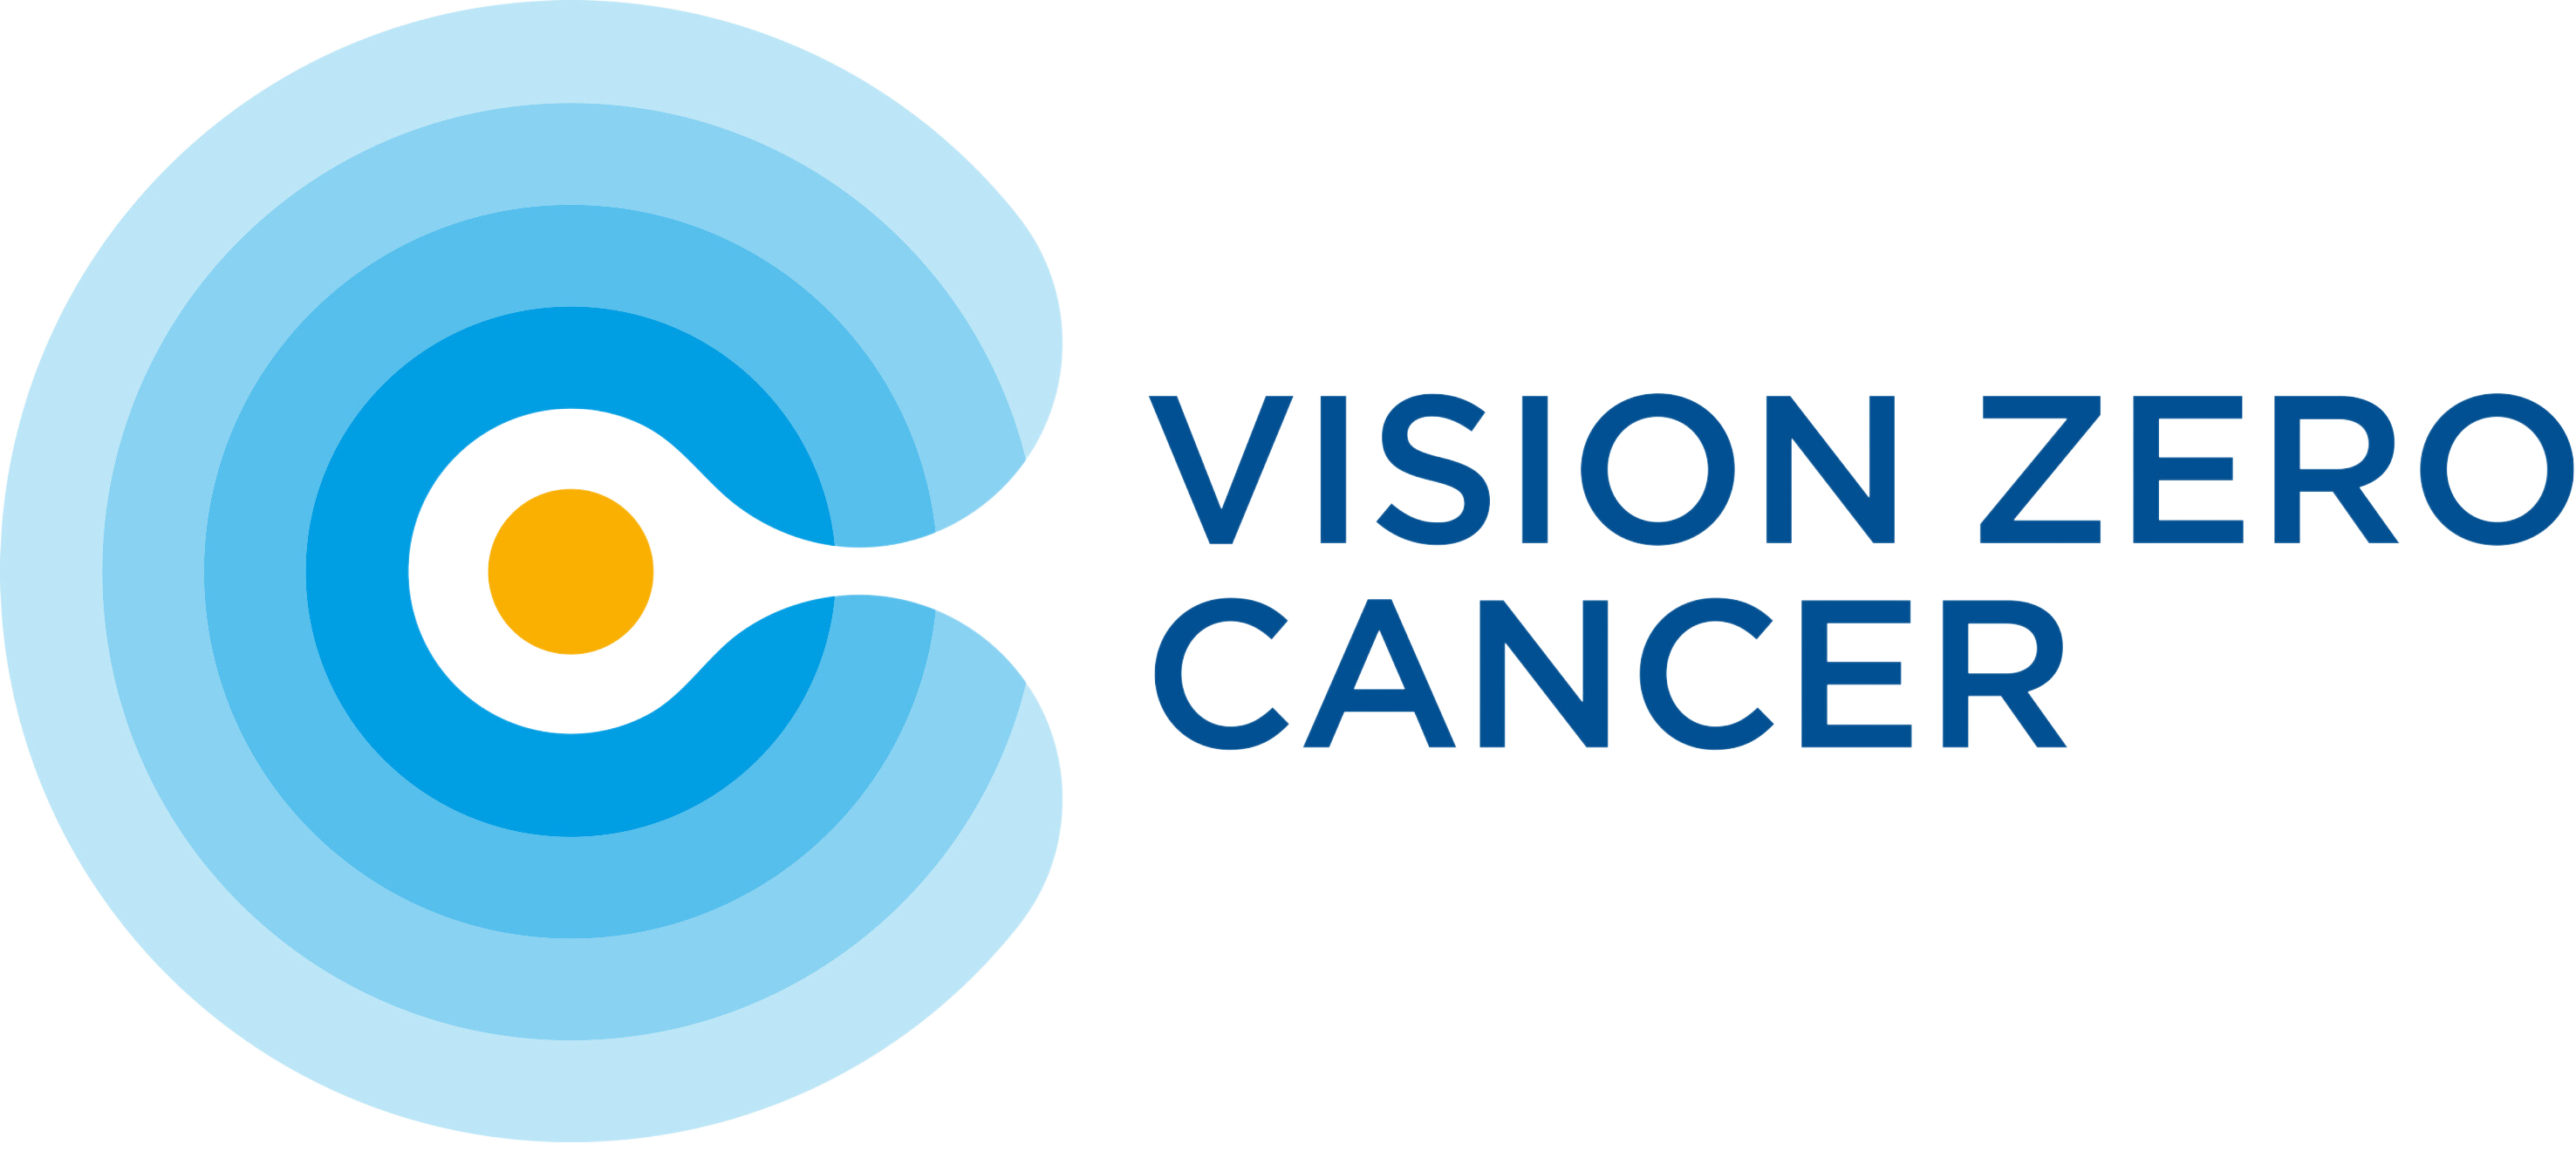 Stiftelsen Stockholm School of Economics Institute for Research (SIR), coordinator of the Vinnova-funded innovation milieus VISION ZERO CANCER and TESTBED SWEDEN PRECISION HEALTH CANCER - Logo